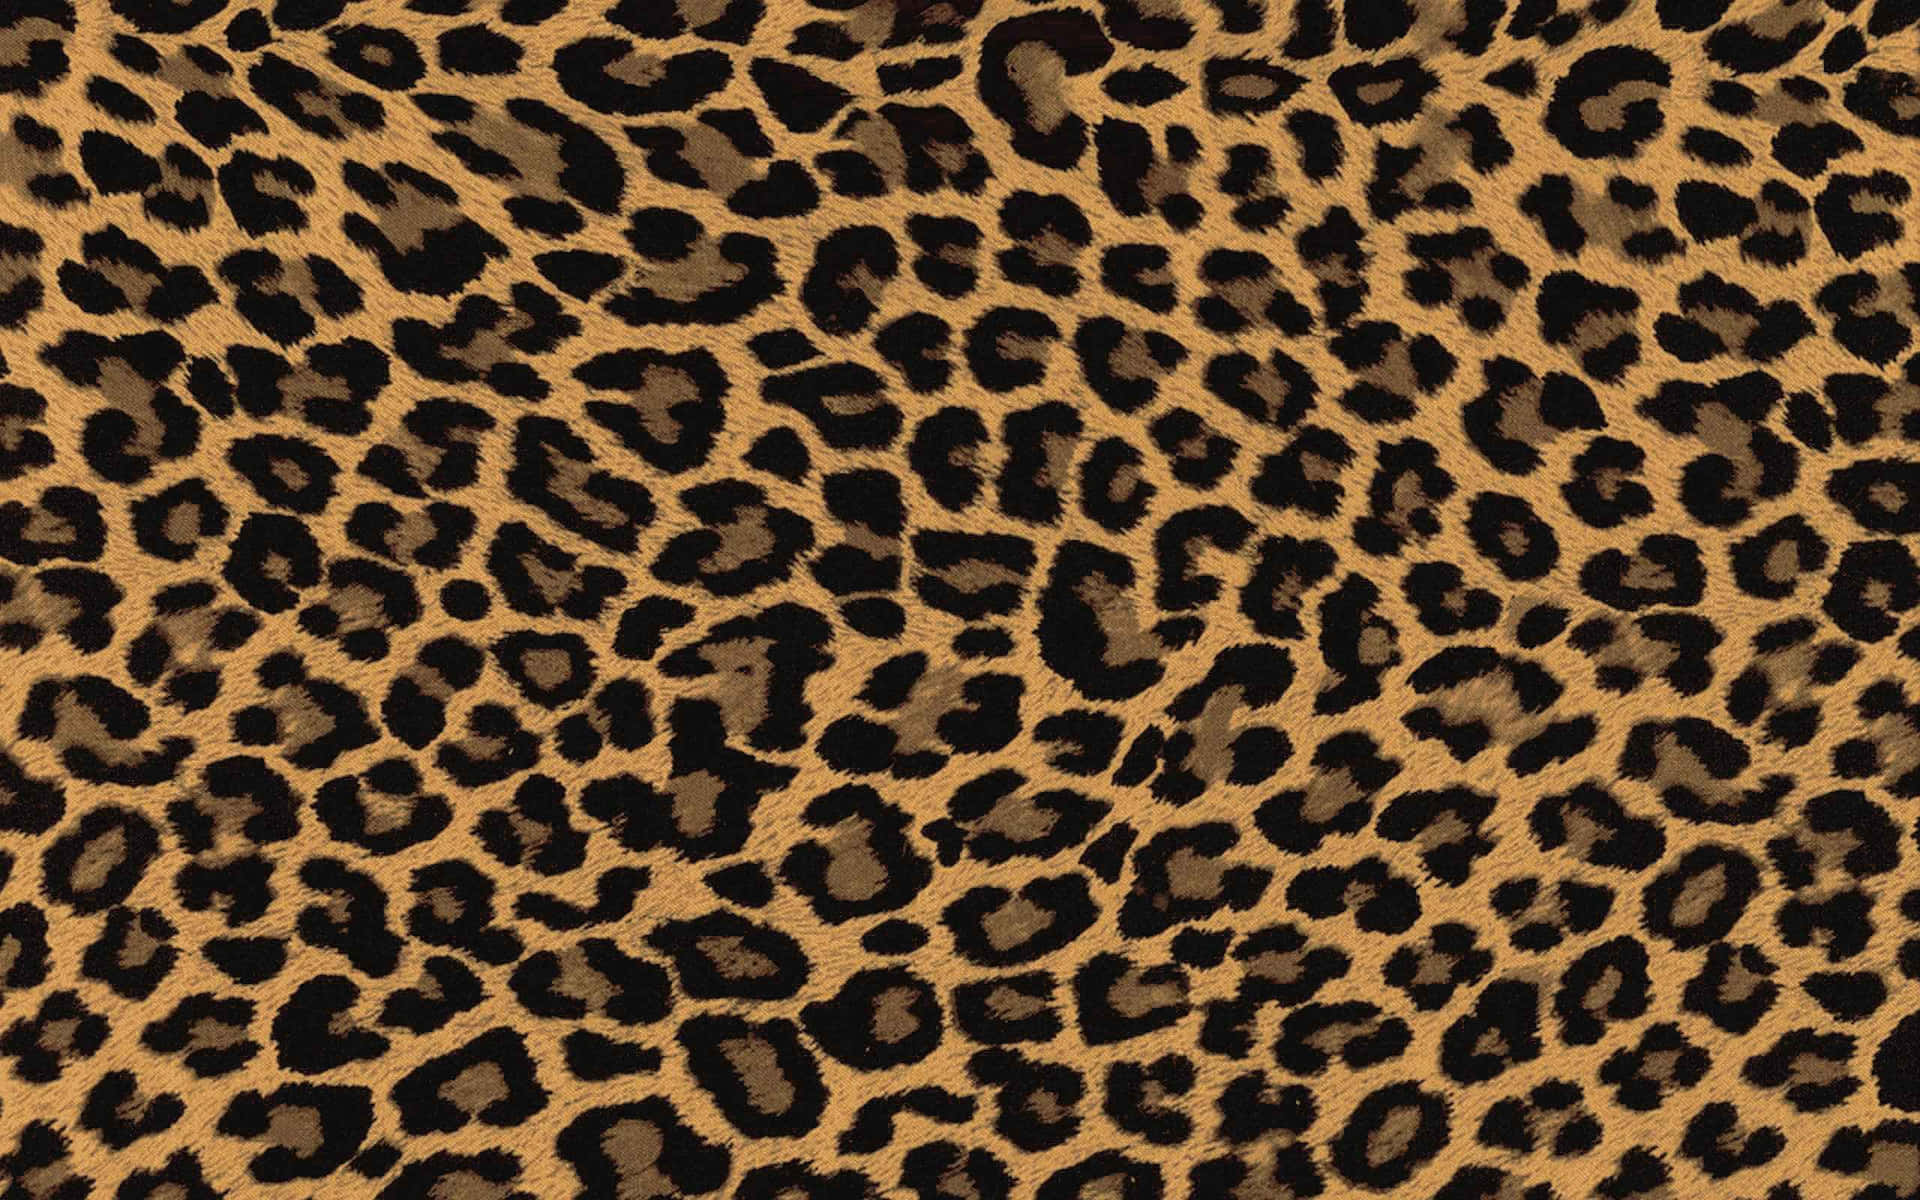 Bright colors make this Leopard Print pattern come to life